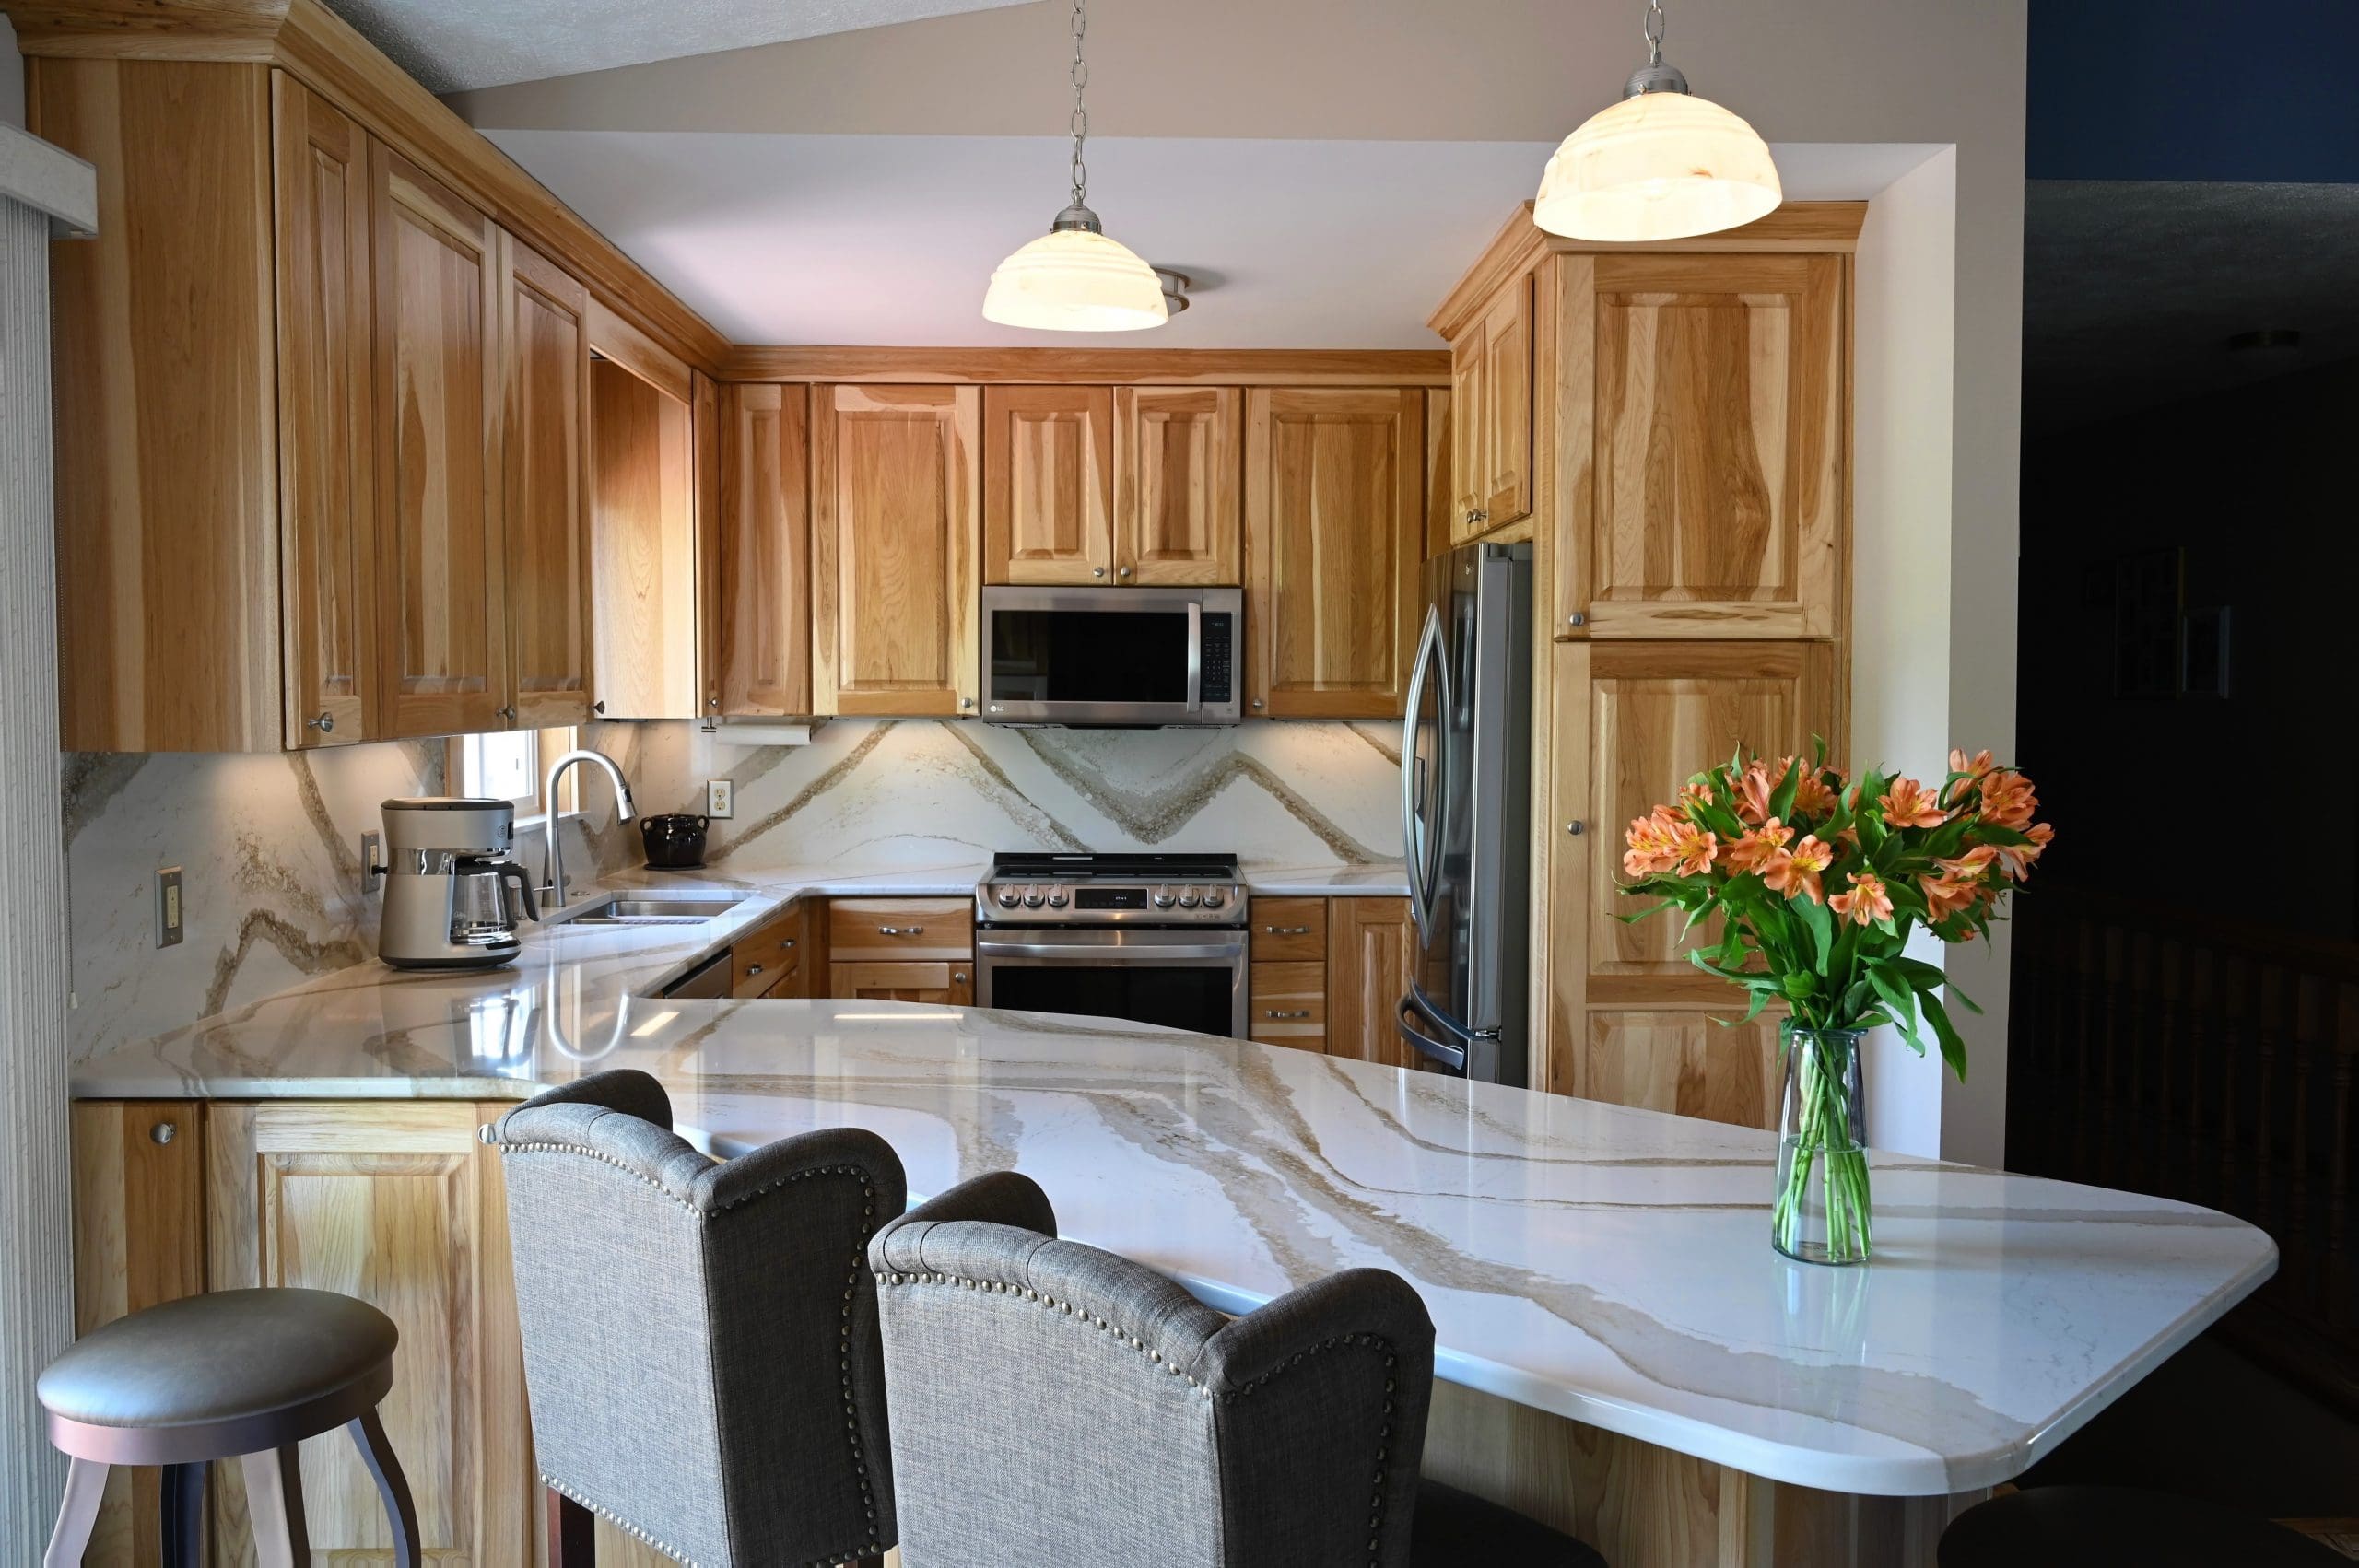 braintree ma kitchen and bath remodeling companies